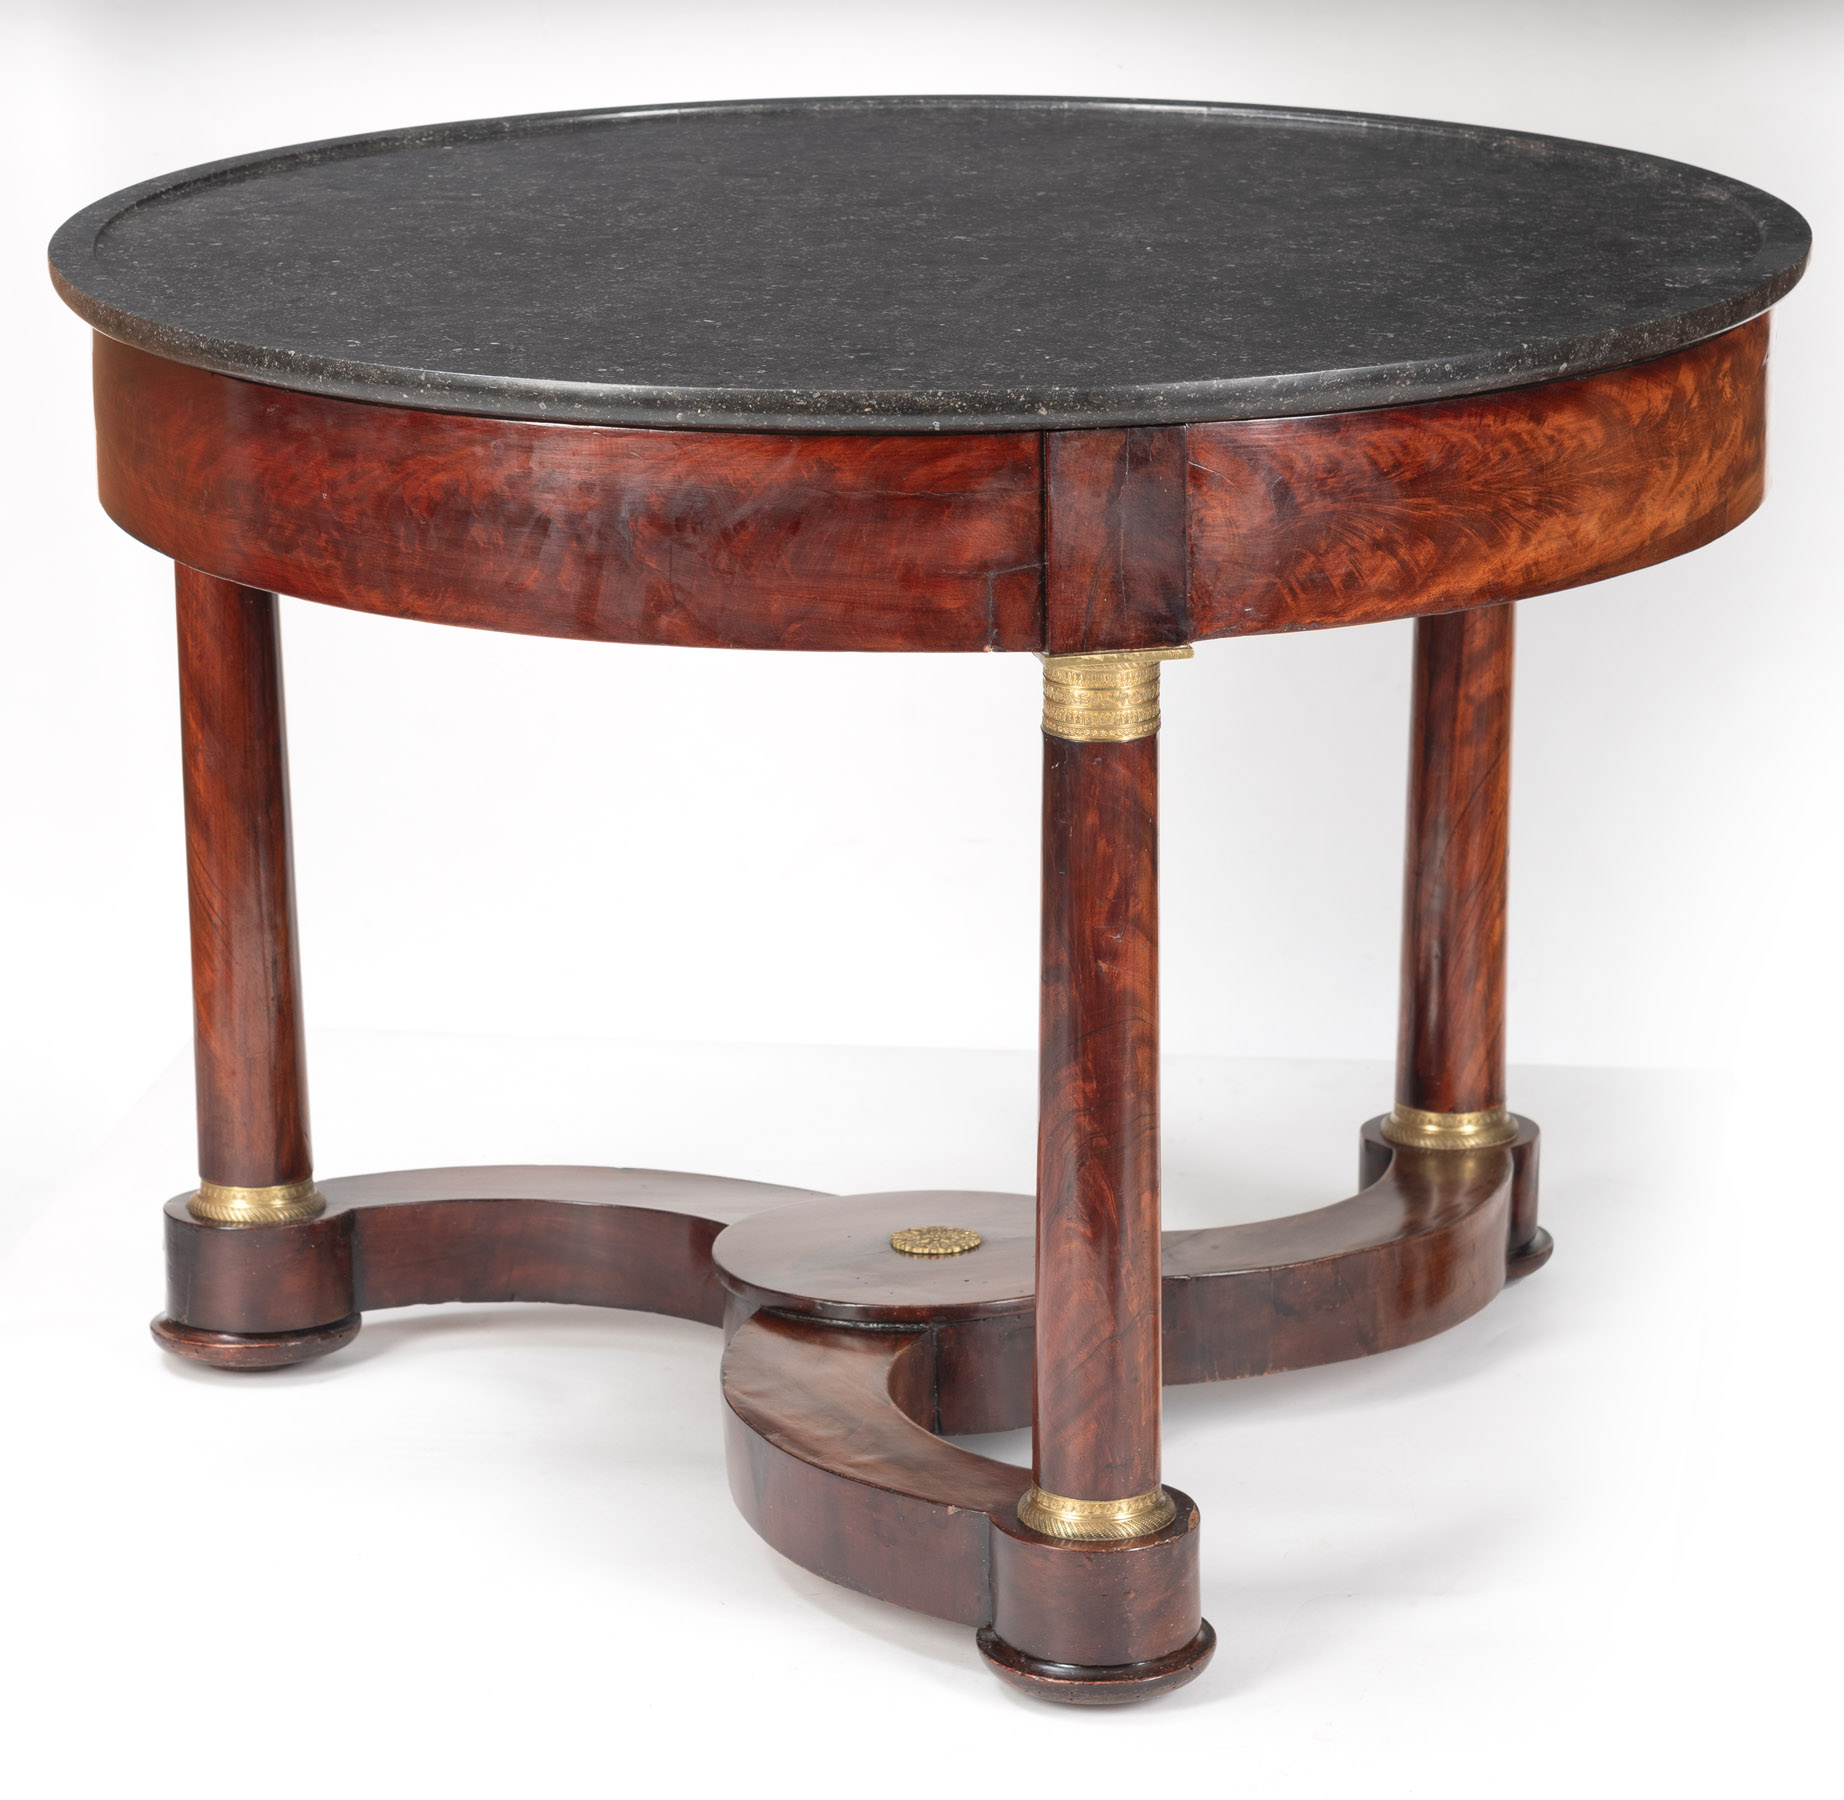 A FRENCH ORMOLU MOUNTED MAHOGANY CENTRE TABLE - Image 2 of 6